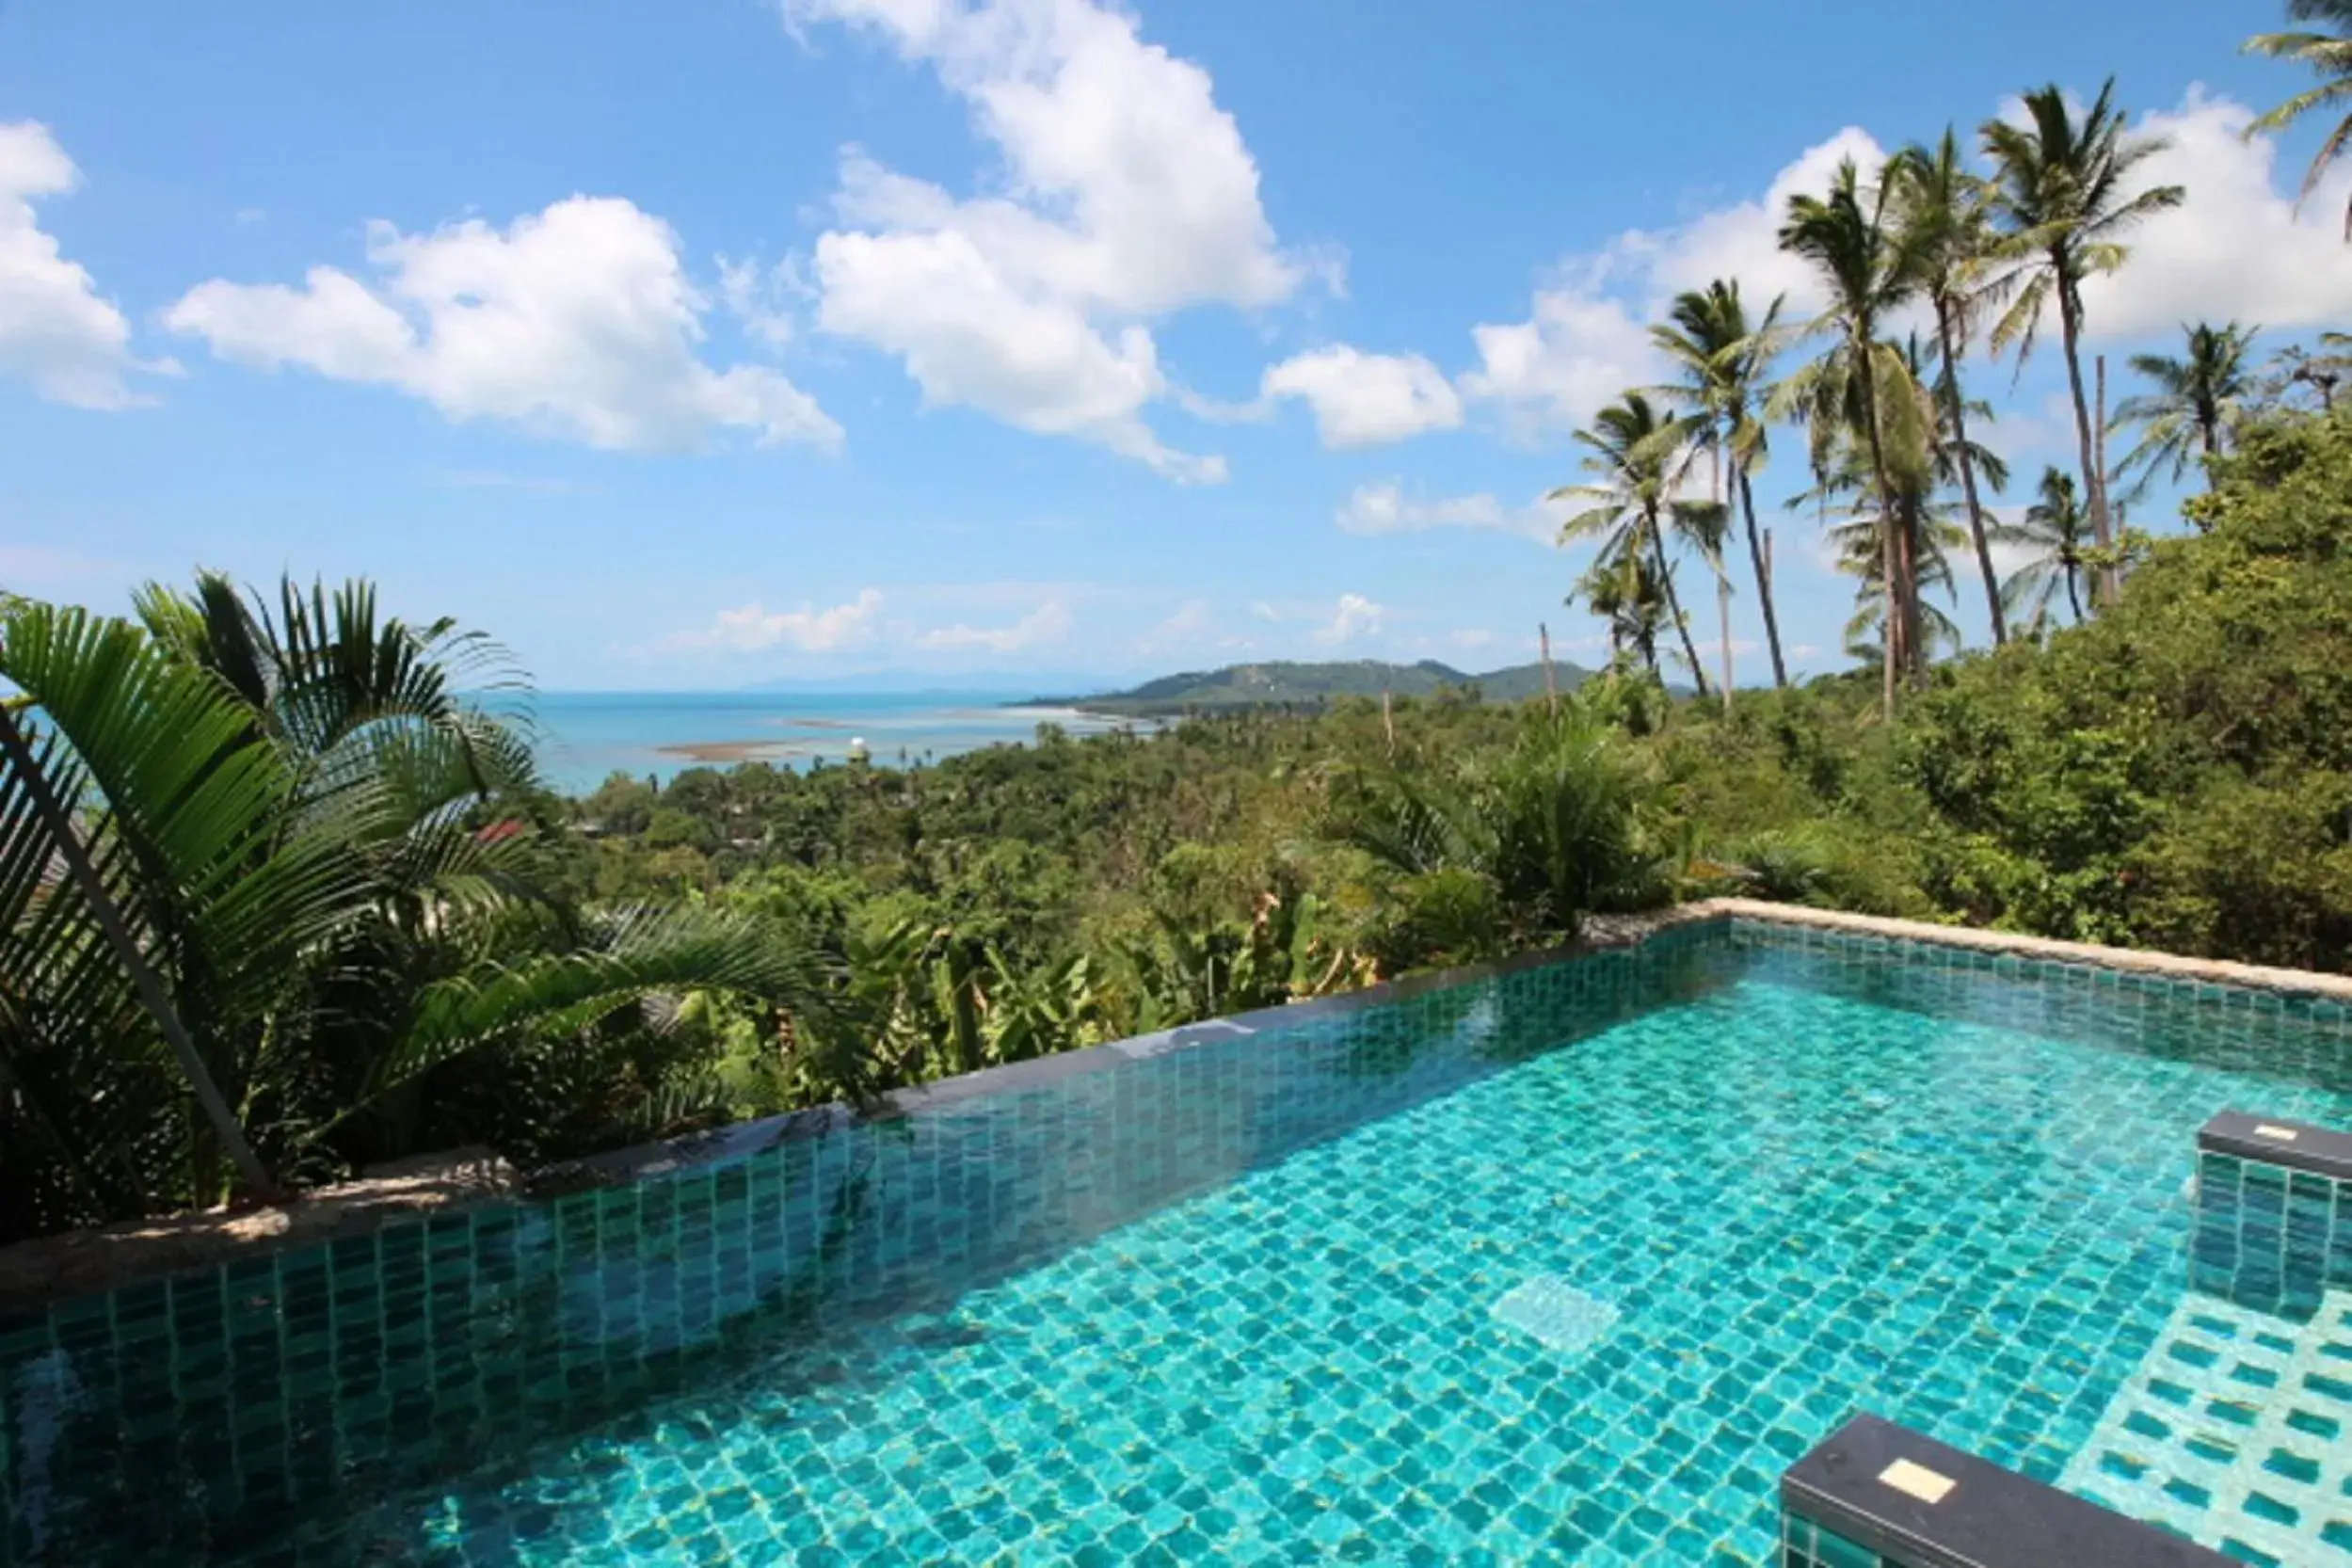 Swimming Pool in Tropical Sea View Residence